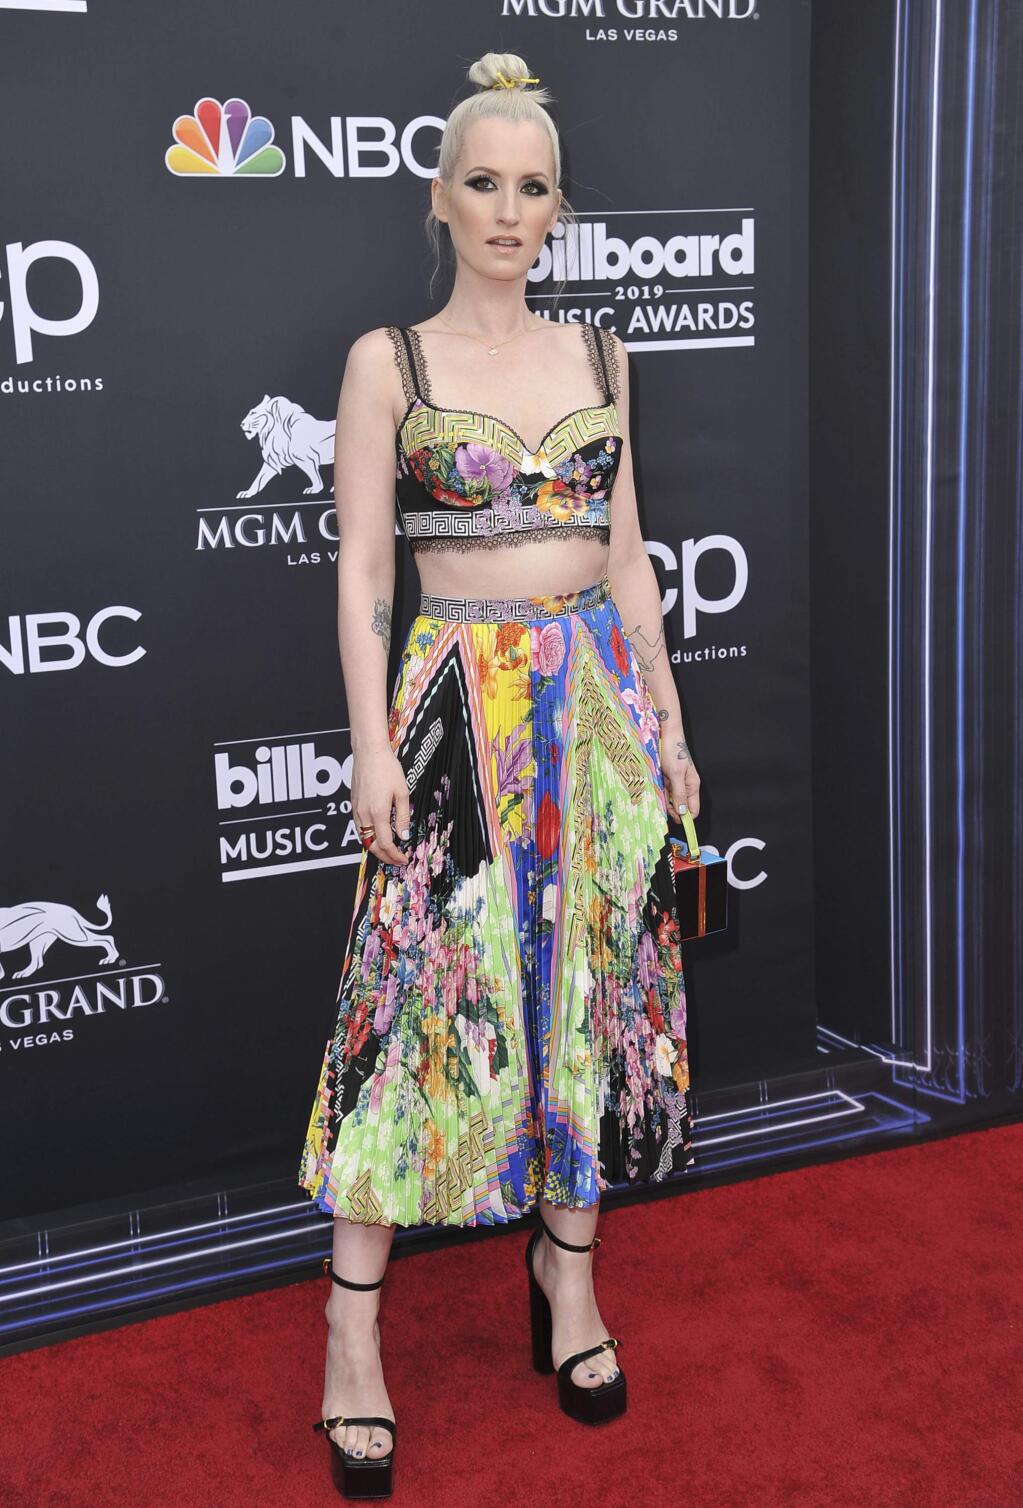 Ingrid Michaelson arrives at the Billboard Music Awards on Wednesday, May 1, 2019, at the MGM Grand Garden Arena in Las Vegas. (Photo by Richard Shotwell/Invision/AP)